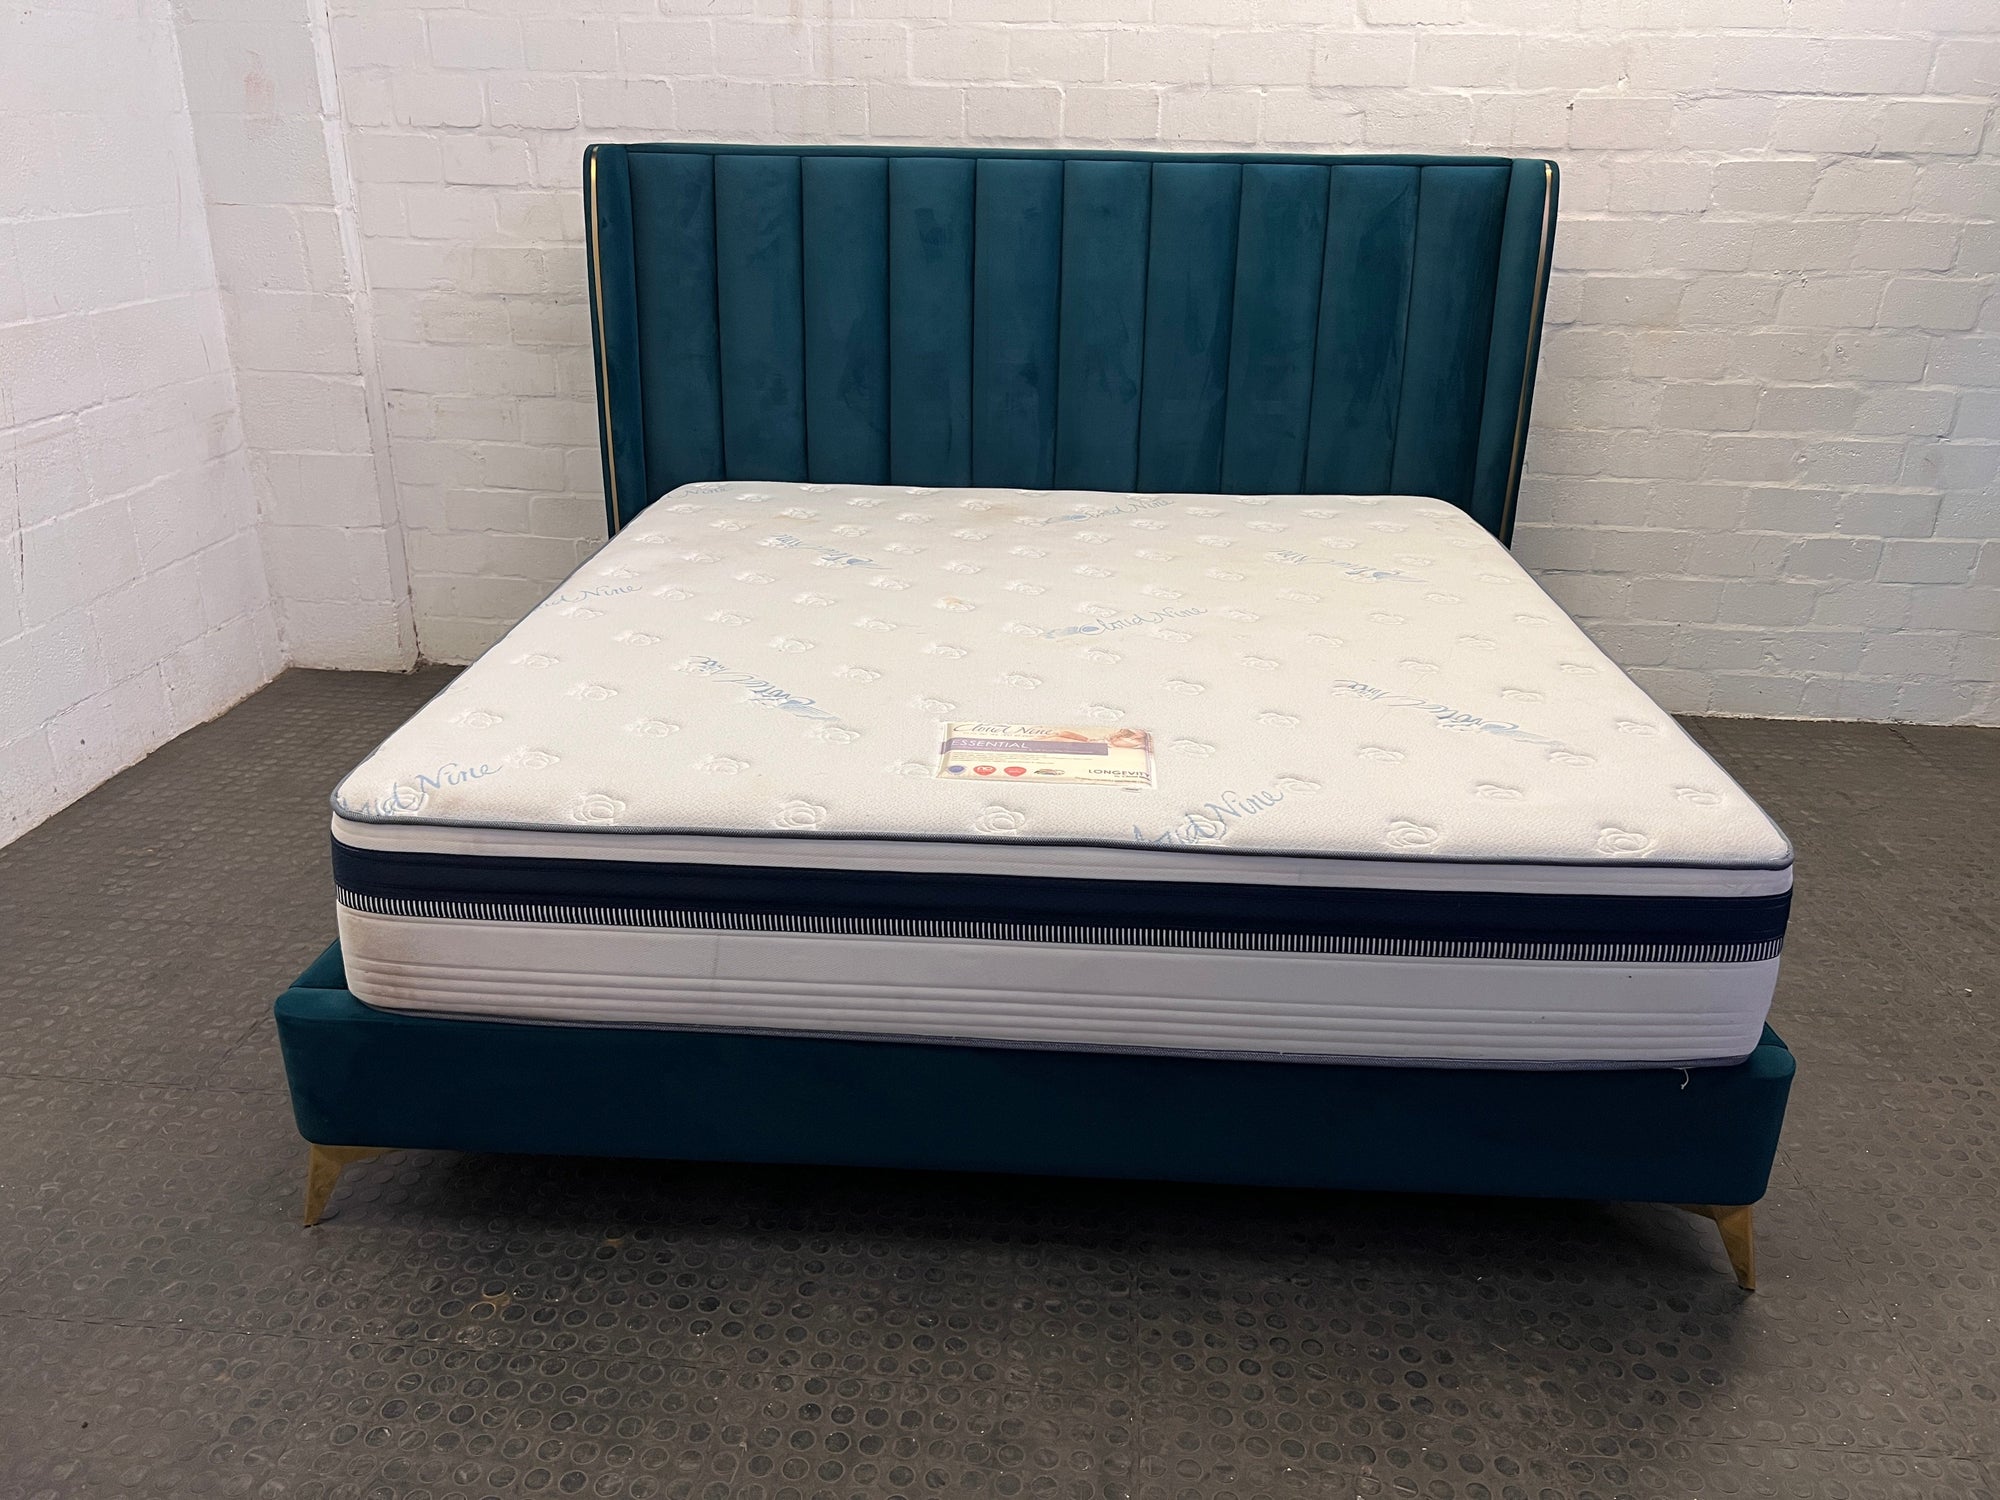 Emerald Green King Sized Bed Base and Headboard with Gold Detailing and Cloud 9 Essential Mattress - REDUCED